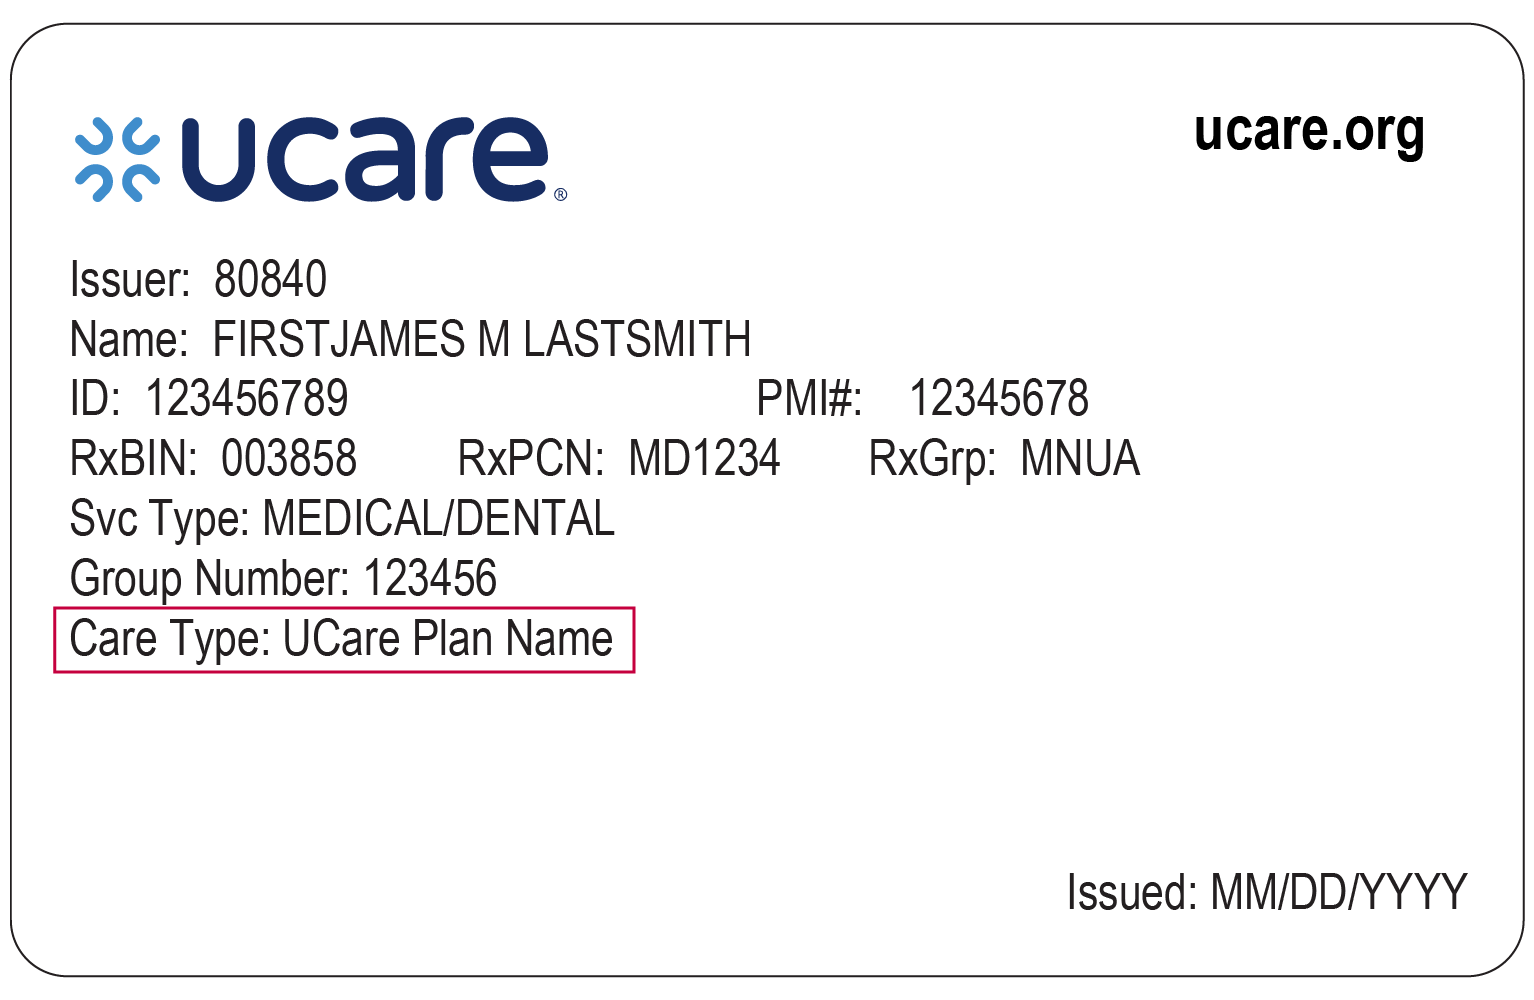 Sample of a UCare ID card with generic information